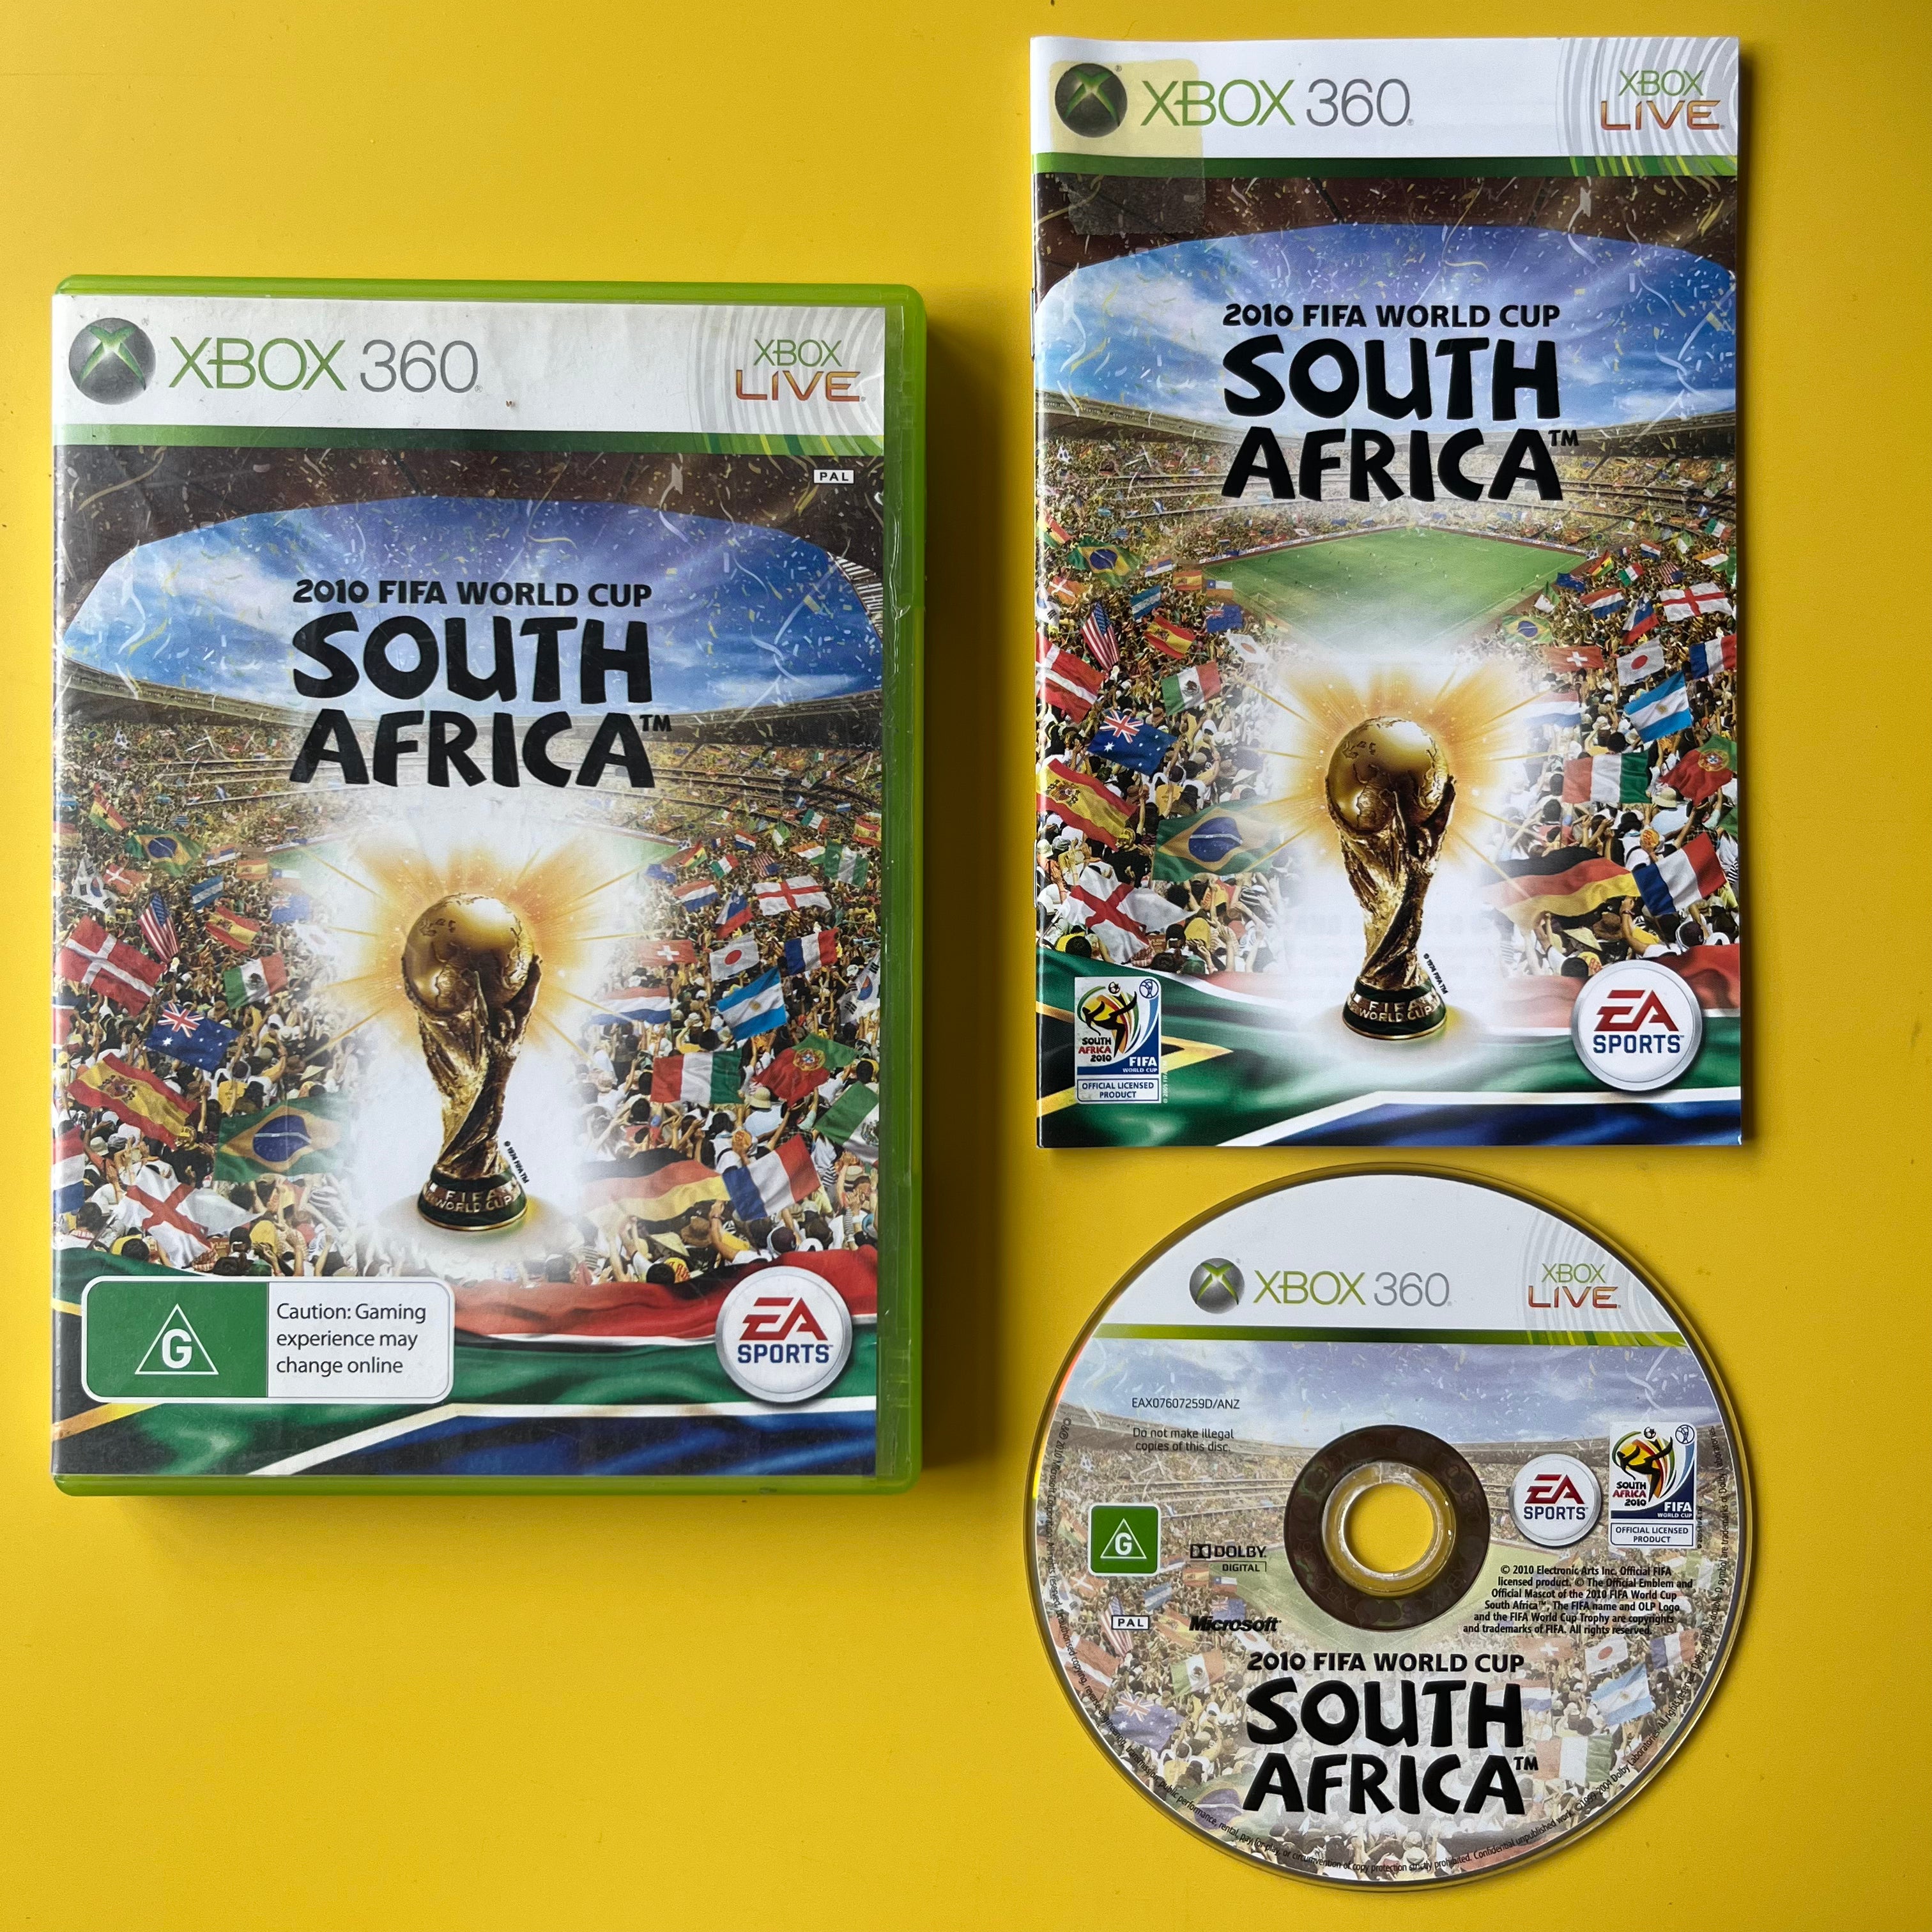 Xbox 360 - 2010 FIFA World Cup South Africa